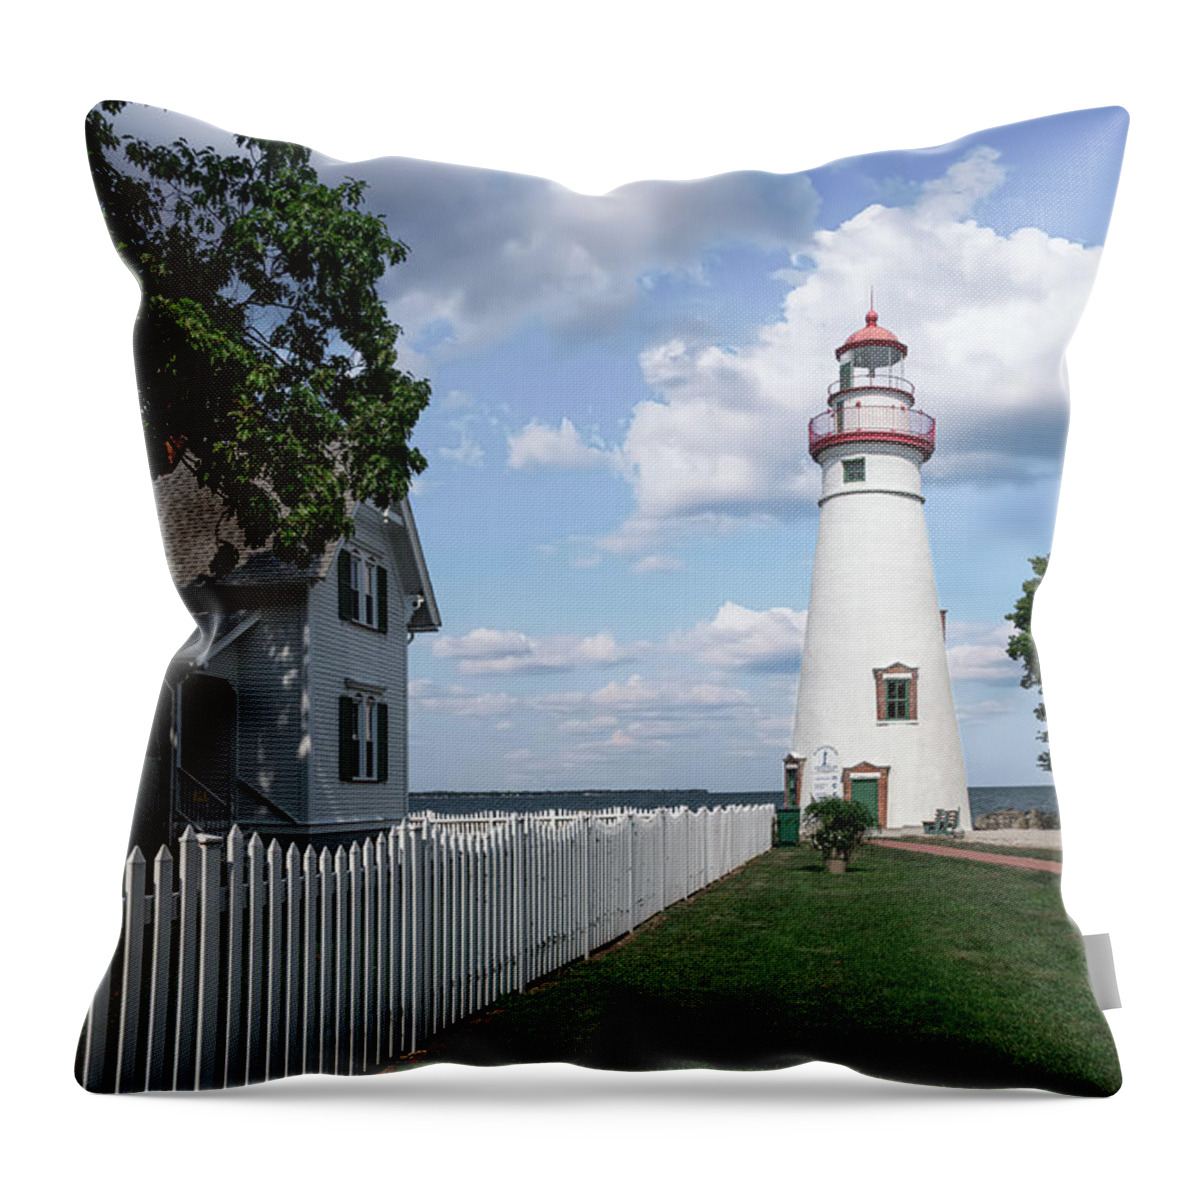 Keepers House Marblehead Lighthouse Throw Pillow featuring the photograph Keepers House At Marblehead Lighthouse by Dale Kincaid